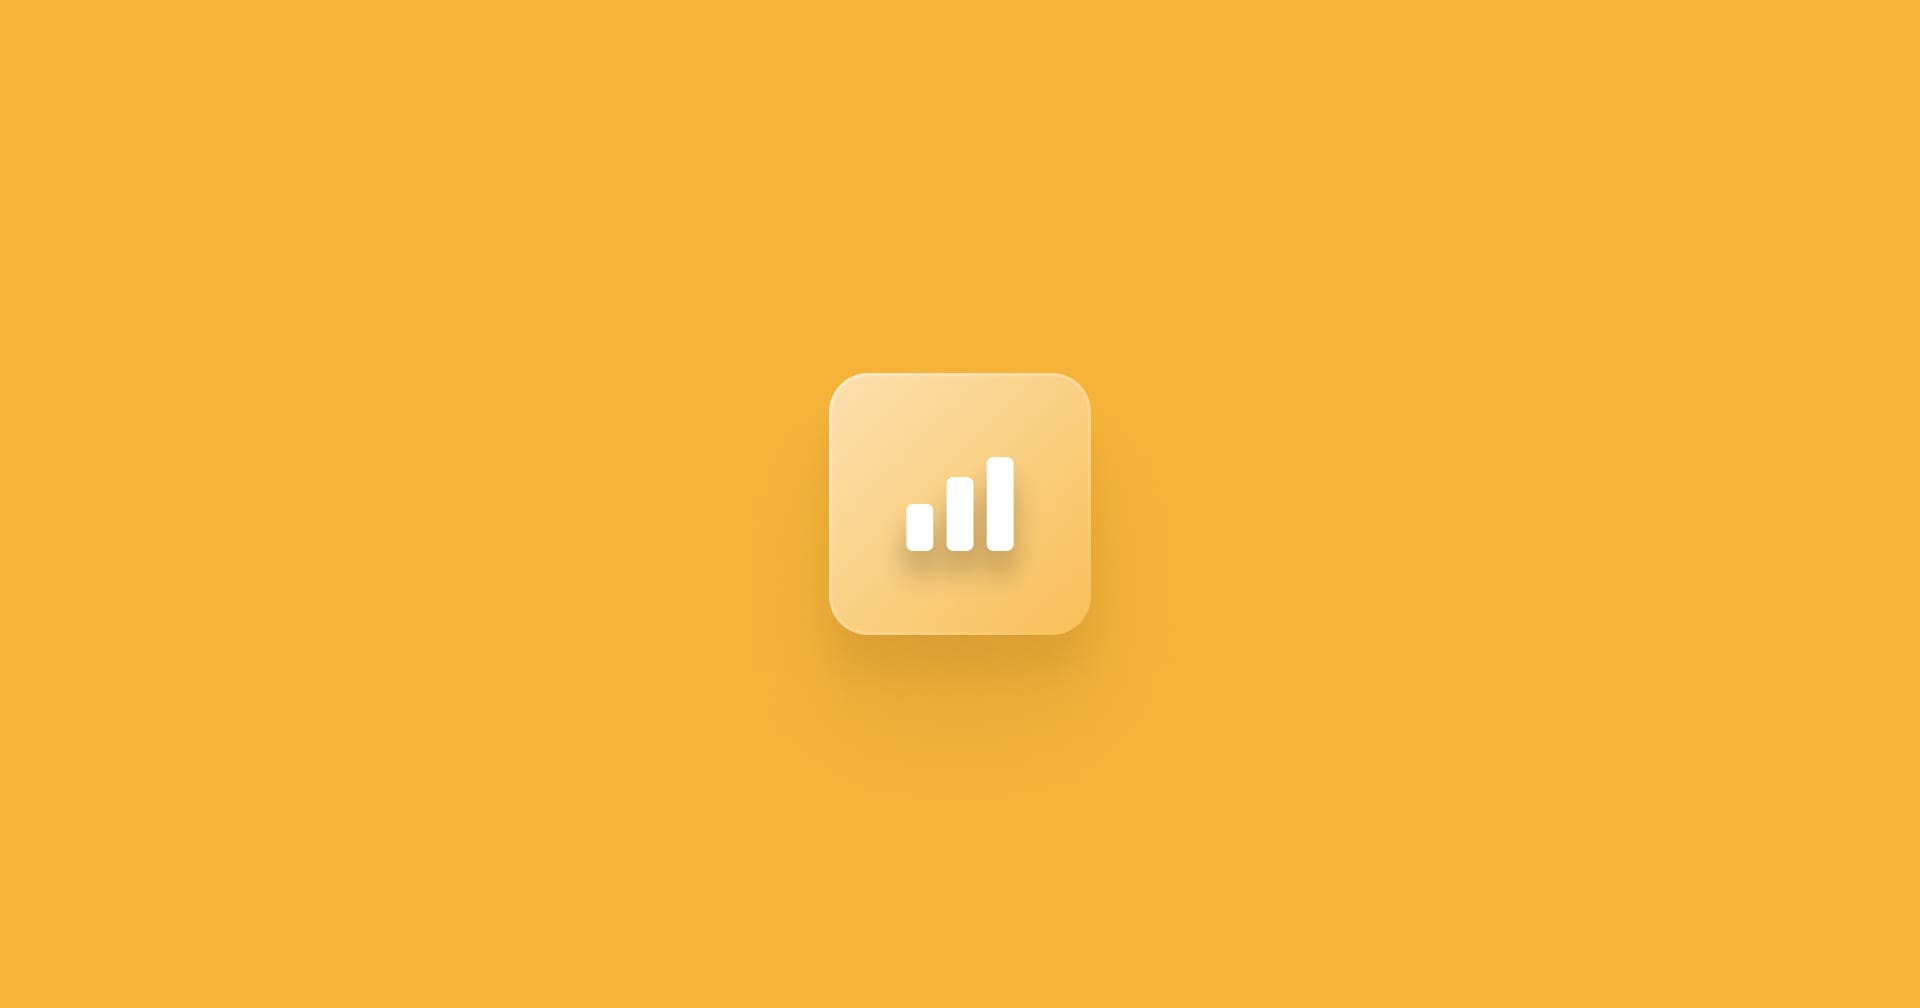 A bar graph icon with a golden yellow background